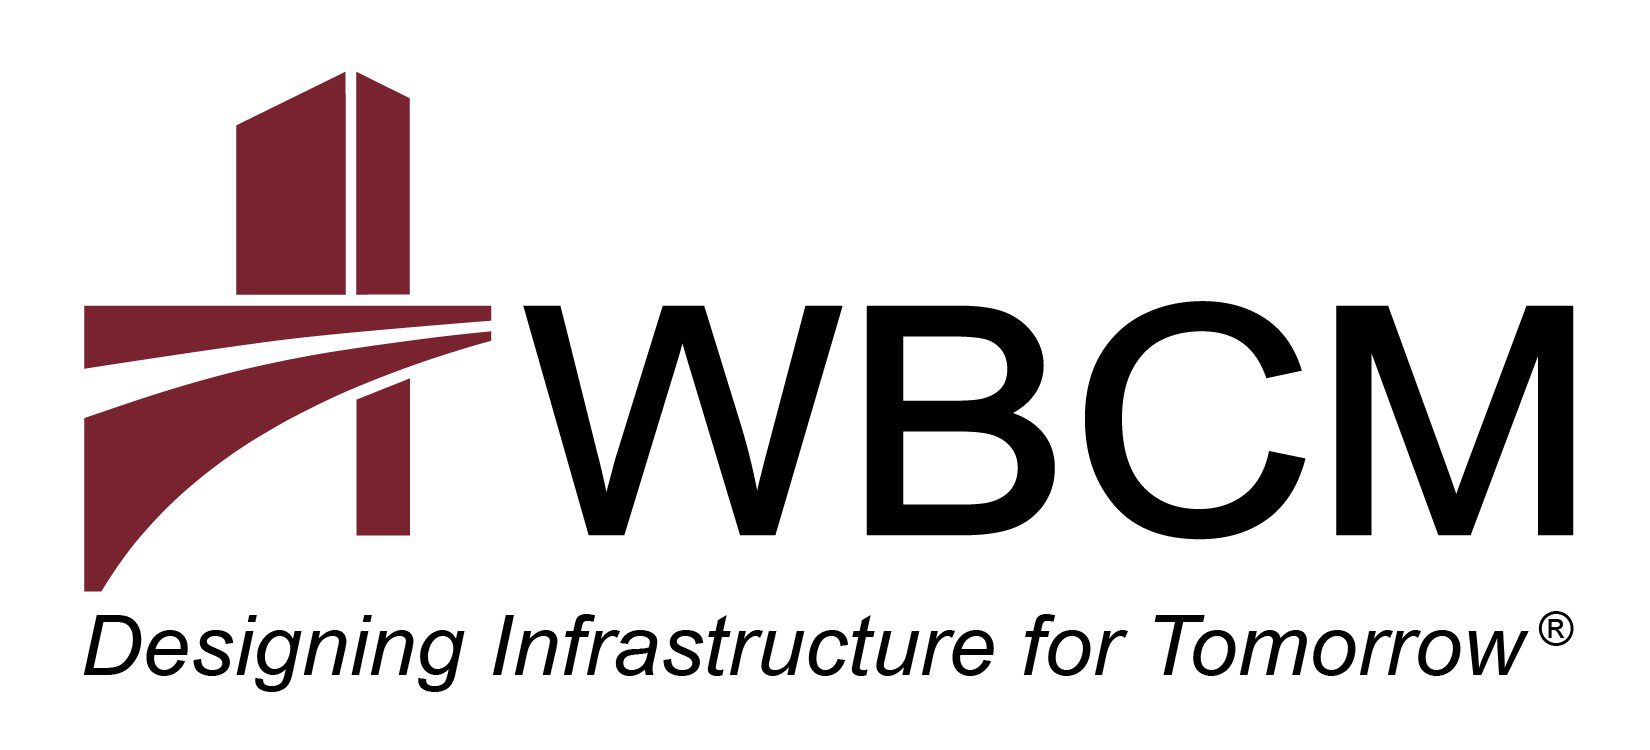 A logo for the wboc, which is currently under construction.